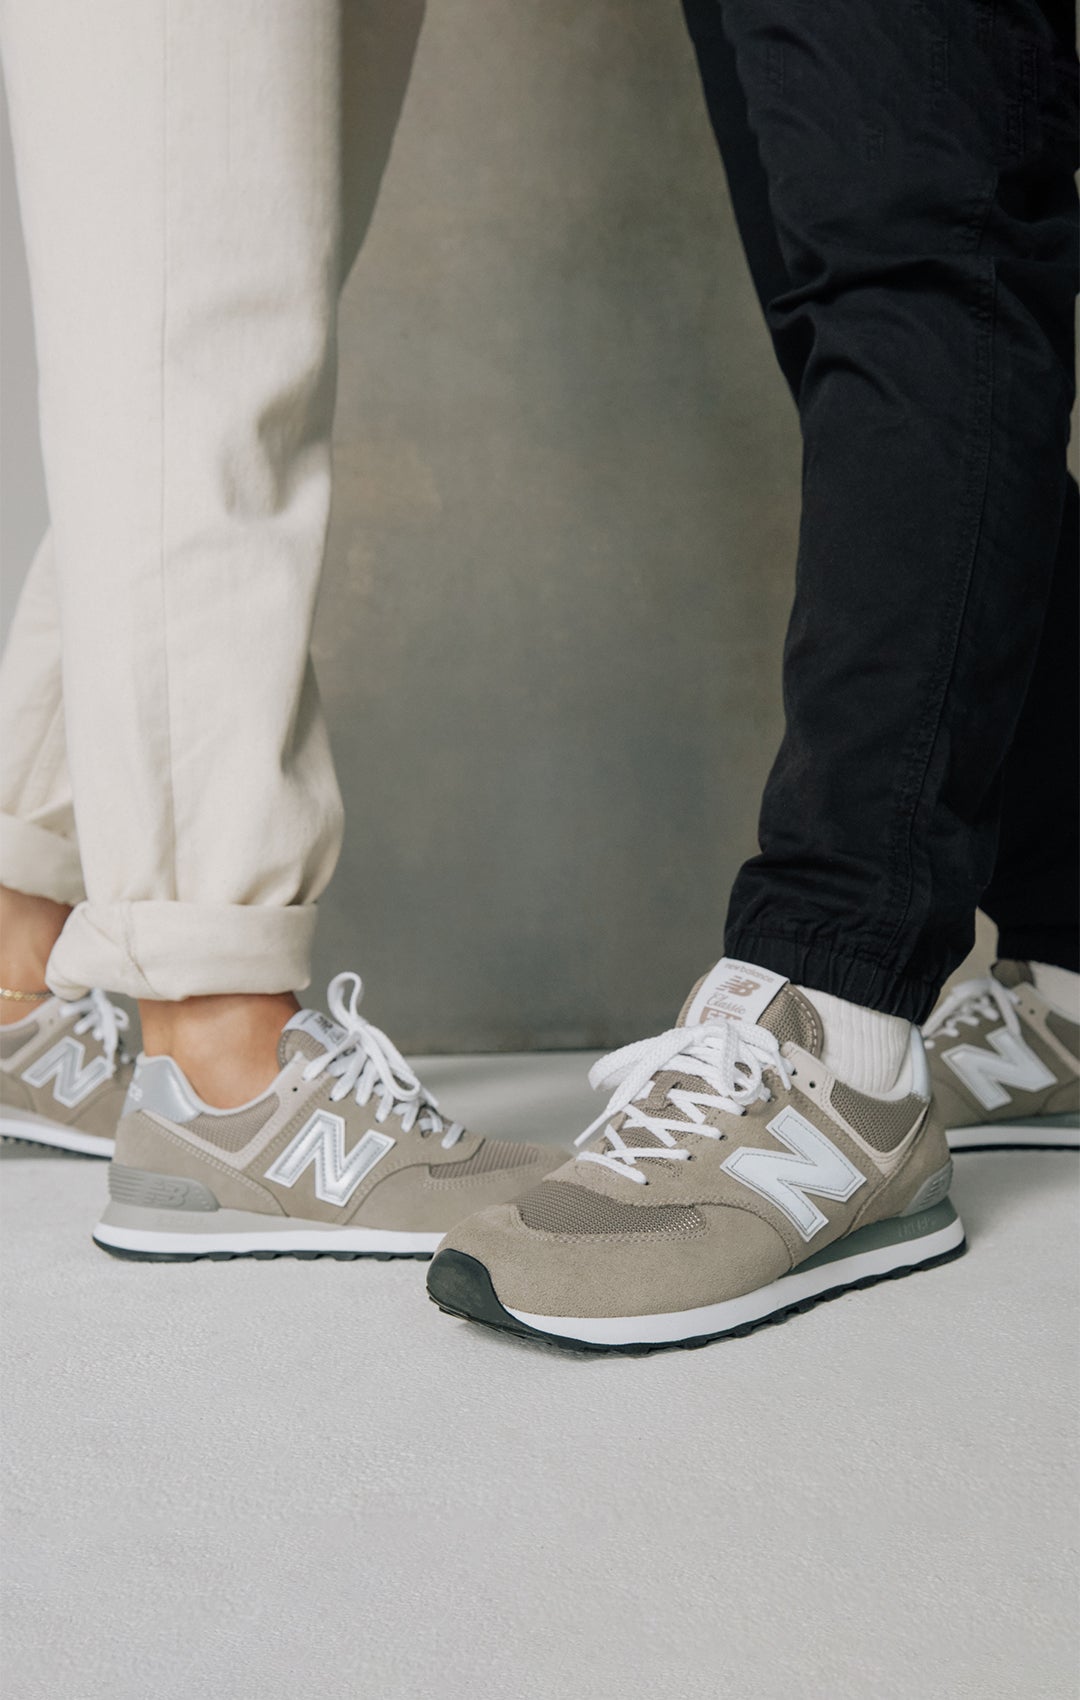 New Balance Shoes, Apparel, & Accessories